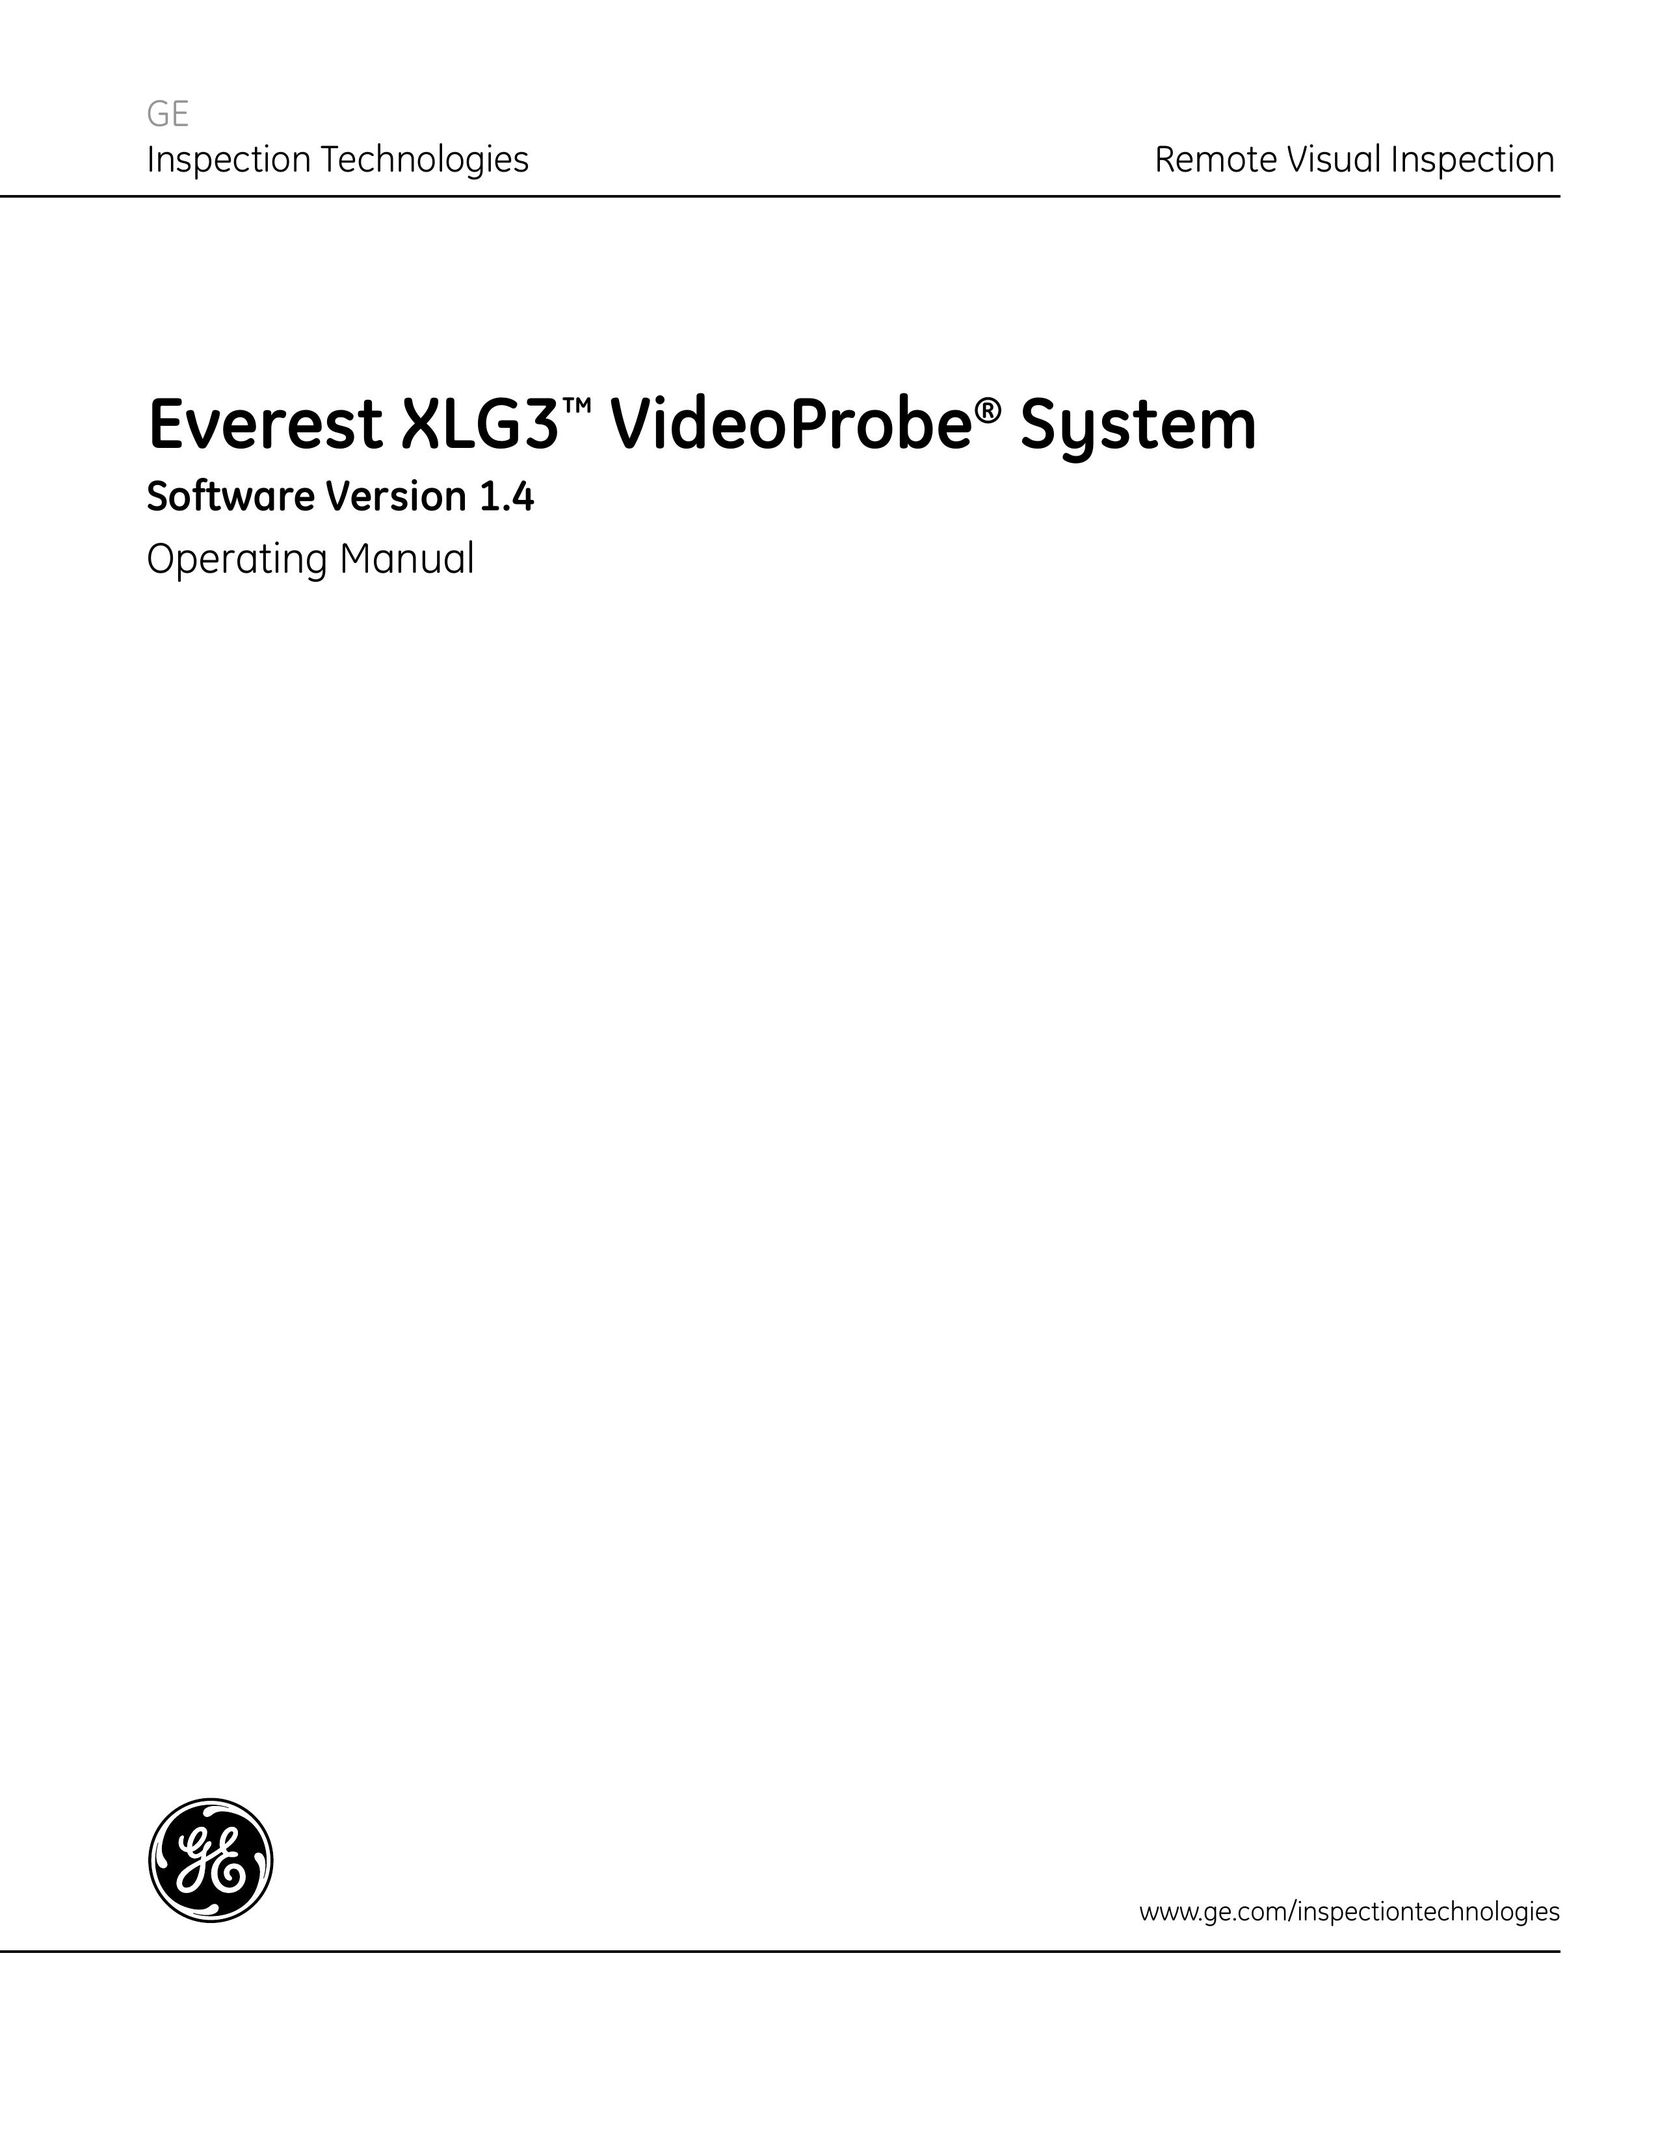 Security Centres XLG3 Home Security System User Manual